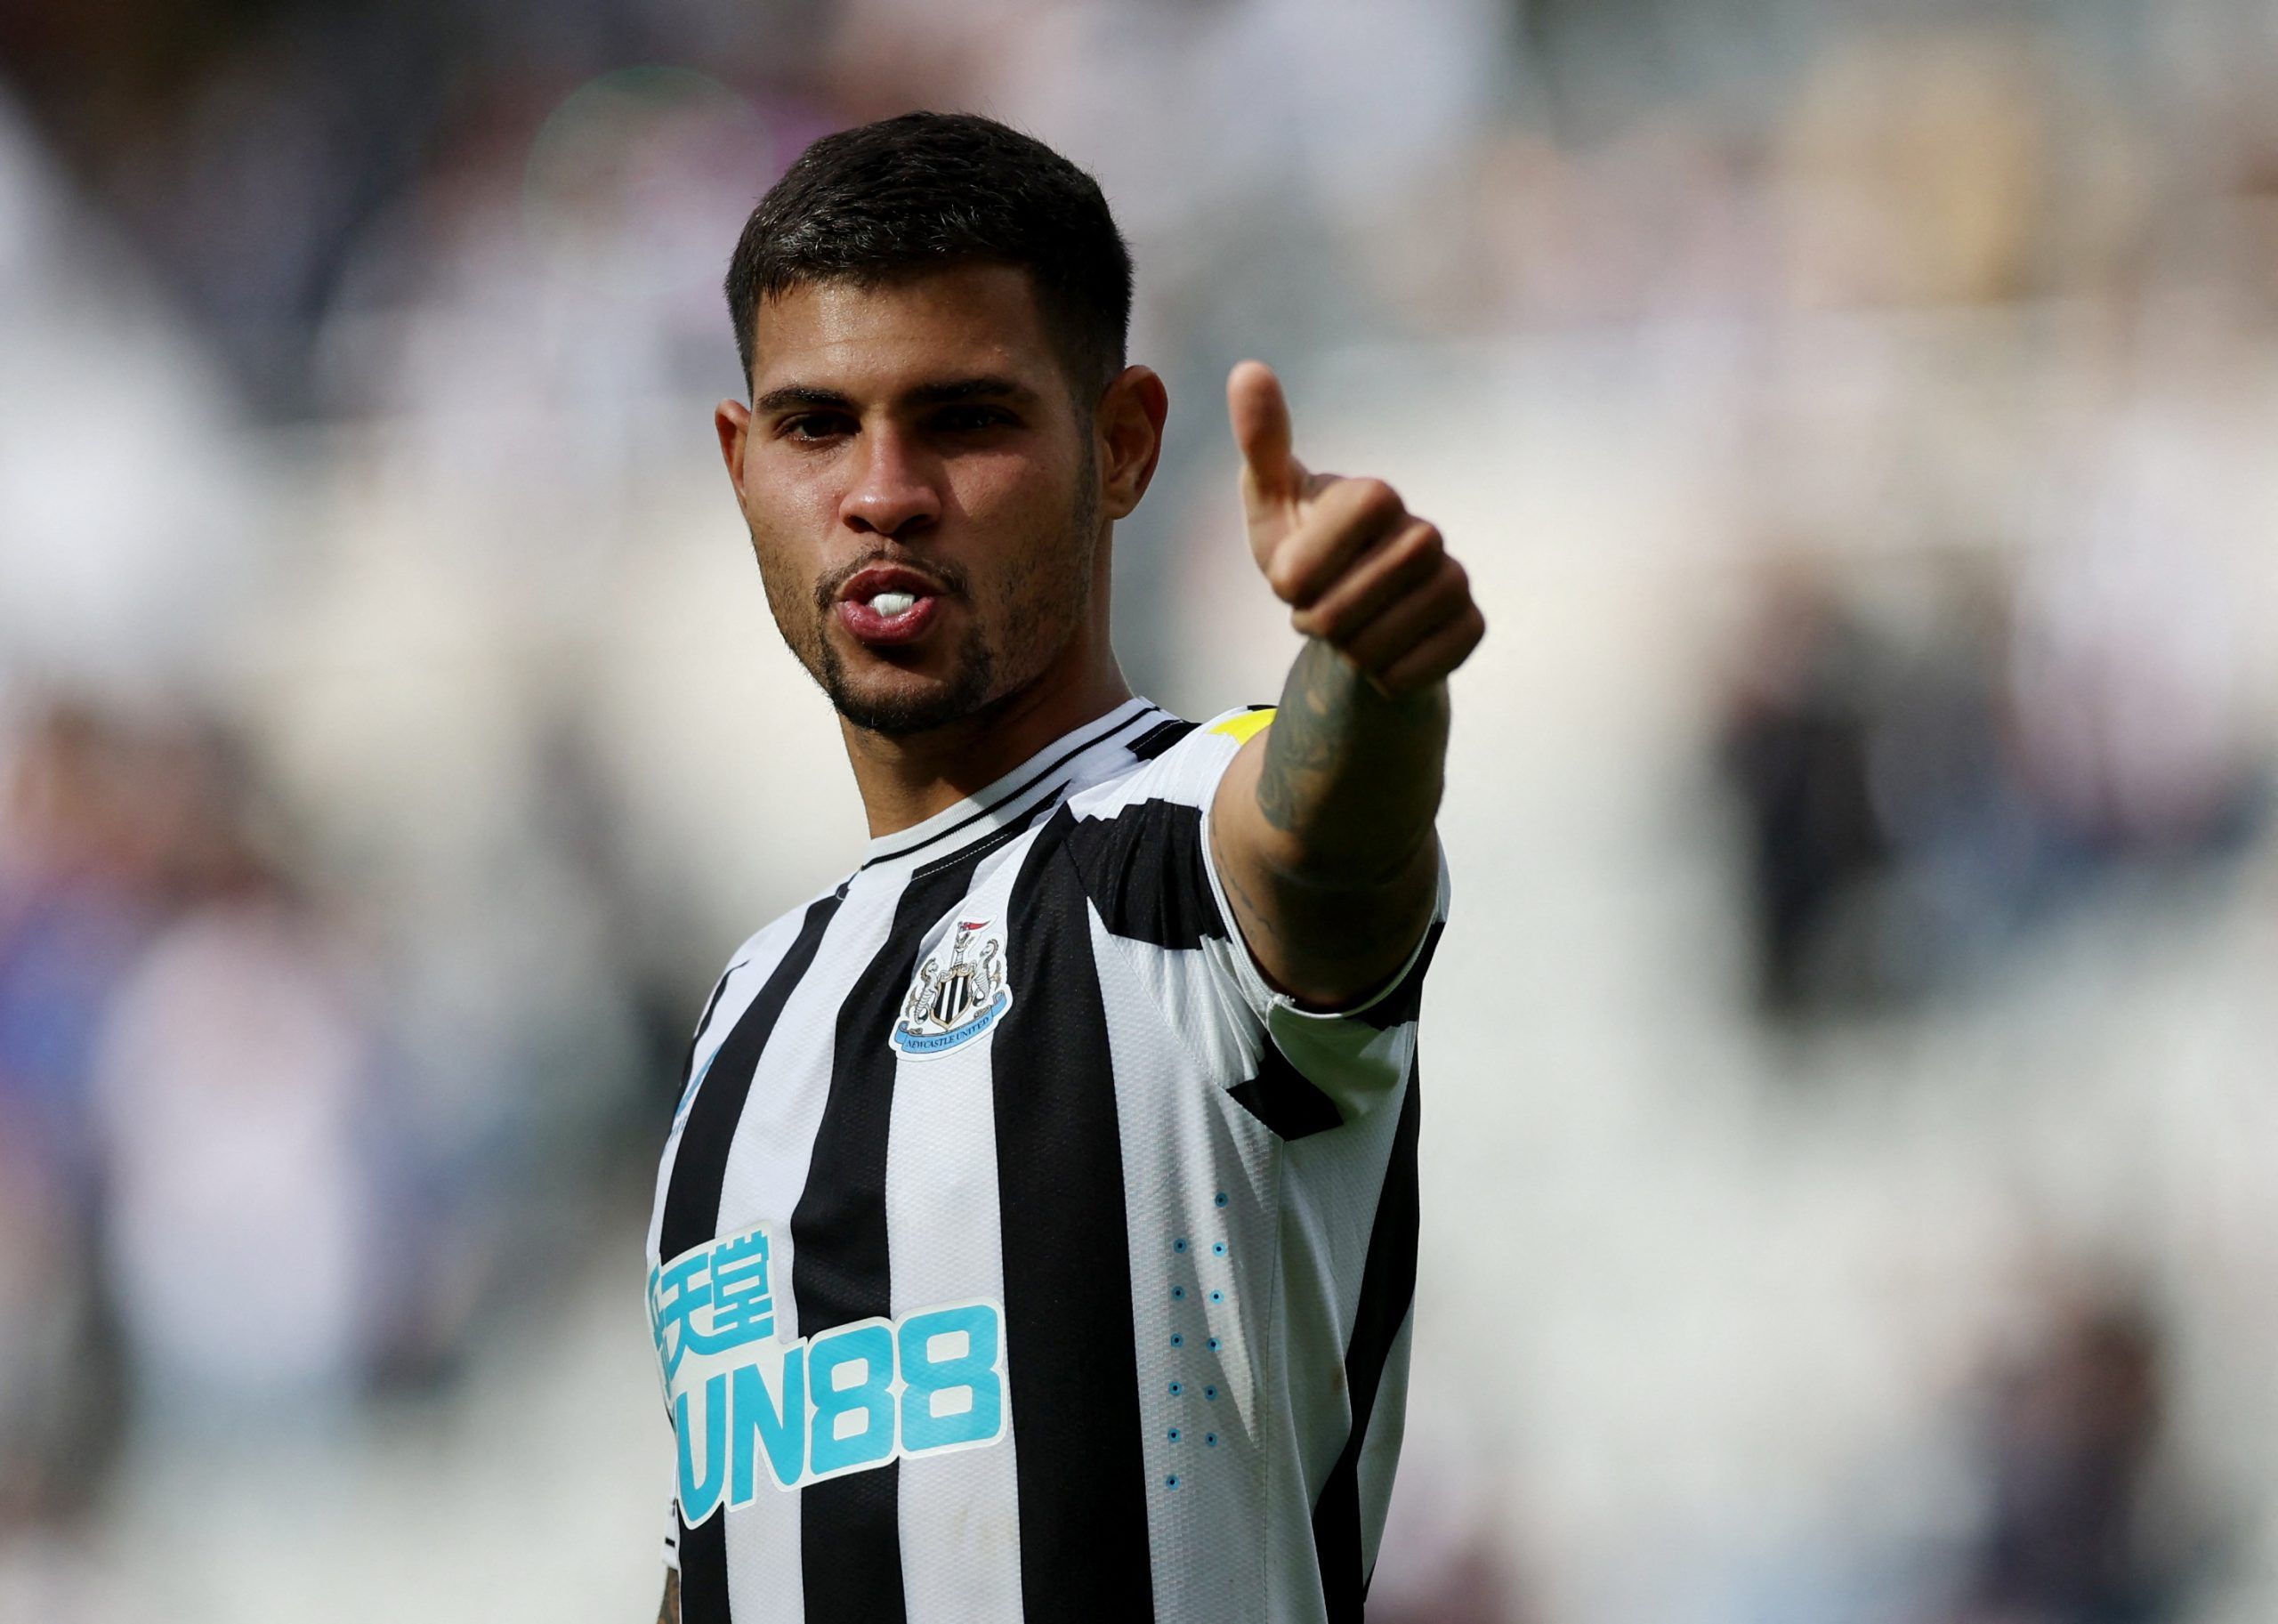 Premier League, Newcastle United, NUFC, NUFC news, NUFC latest news, Newcastle vs Nottingham Forest, Bruno Guimaraes, Performance in Numbers, NUFC latest update, Howe